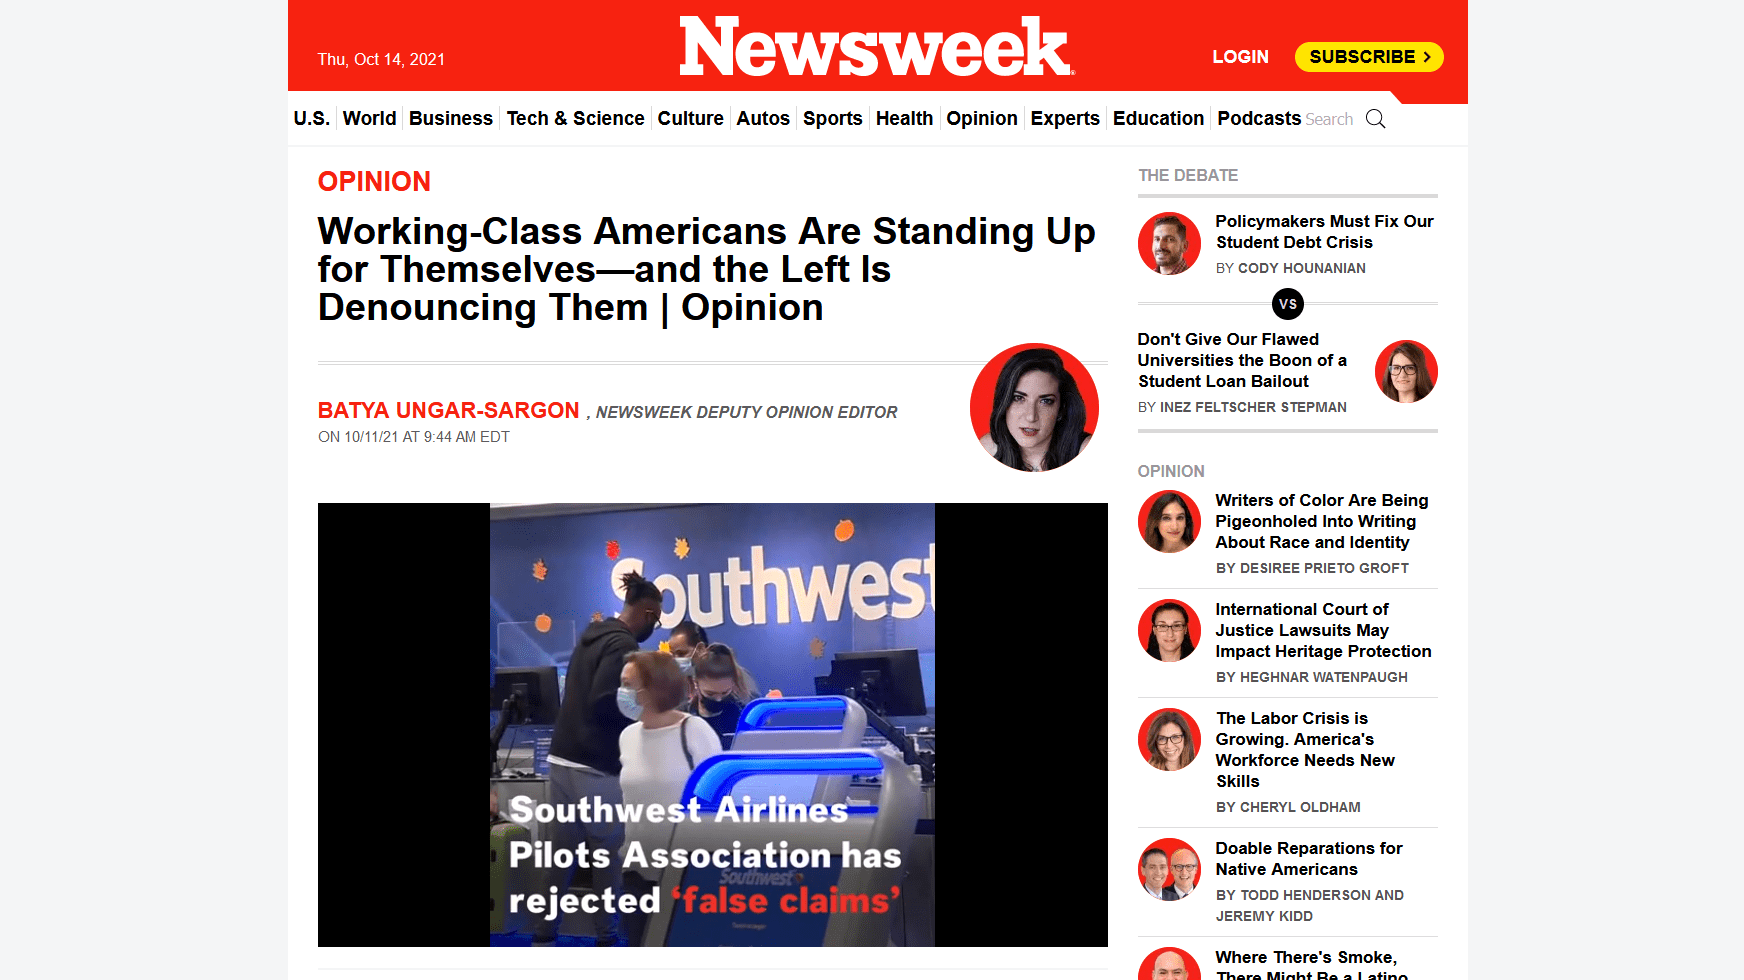 An op-ed in Newsweek claiming, despite the absence of any evidence, that Southwest outages this weekend were due to protests against coronavirus vaccines. (Screenshot: Newsweek, Fair Use)